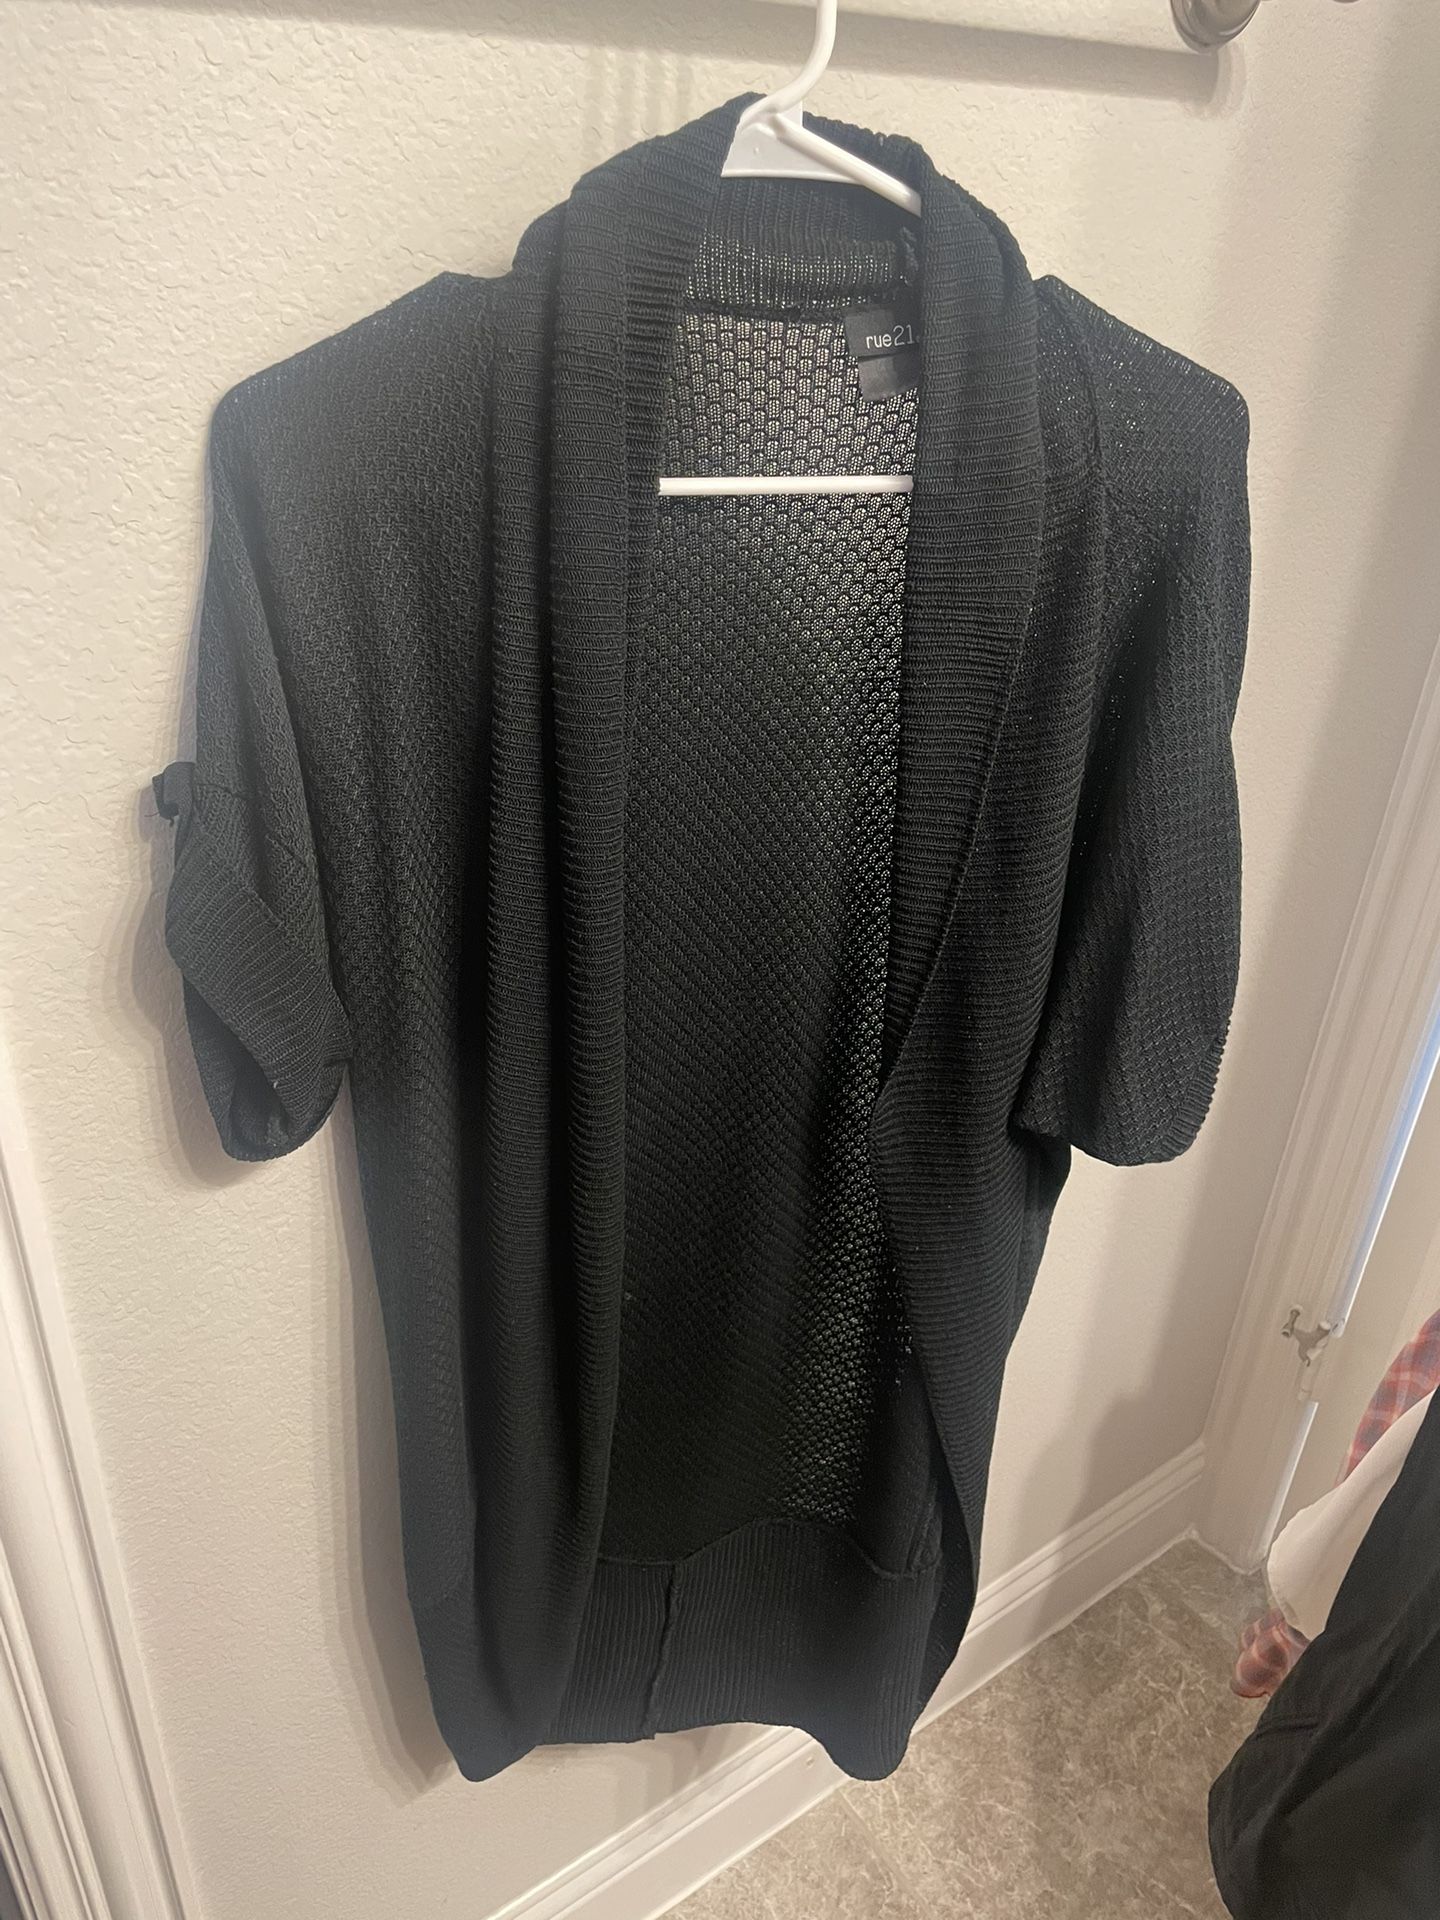 Rue 21 Black Open Cardigan 1/2 Sleeves, One Size